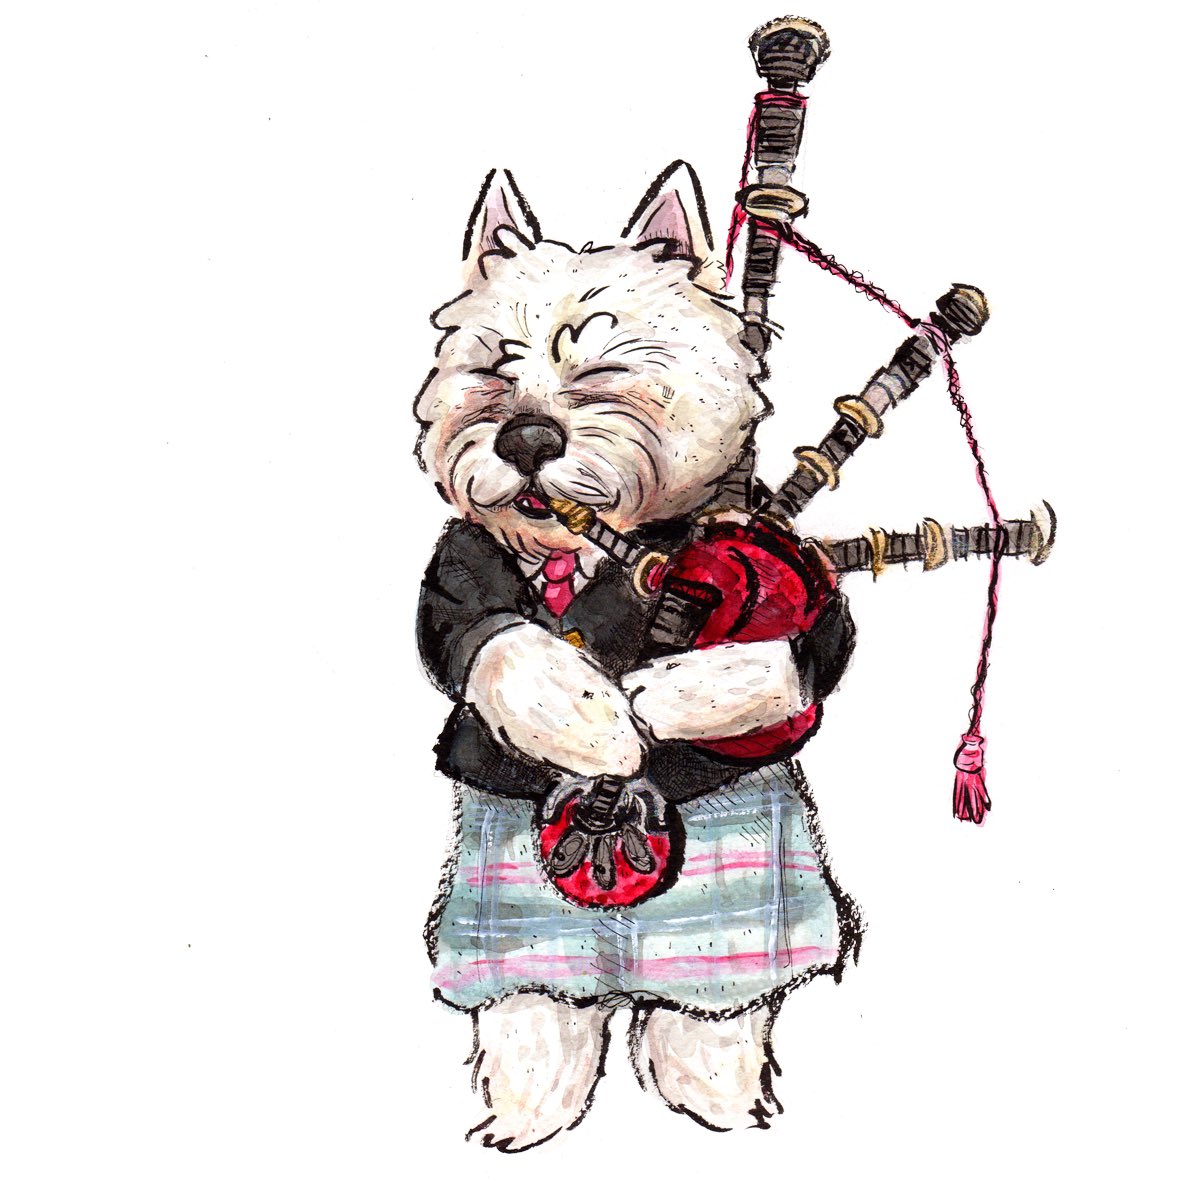 #finished #watercolour #watercolor #illustration #petportrait #westie #westhighlandterrier #DogsofTwitter #woof #woofwoof #music #musician #bagpipes #bagpiper #scotland #scottish #dog #sunday #SundayMotivation #drawdrawdraw #paintpaintpaint #illustrator